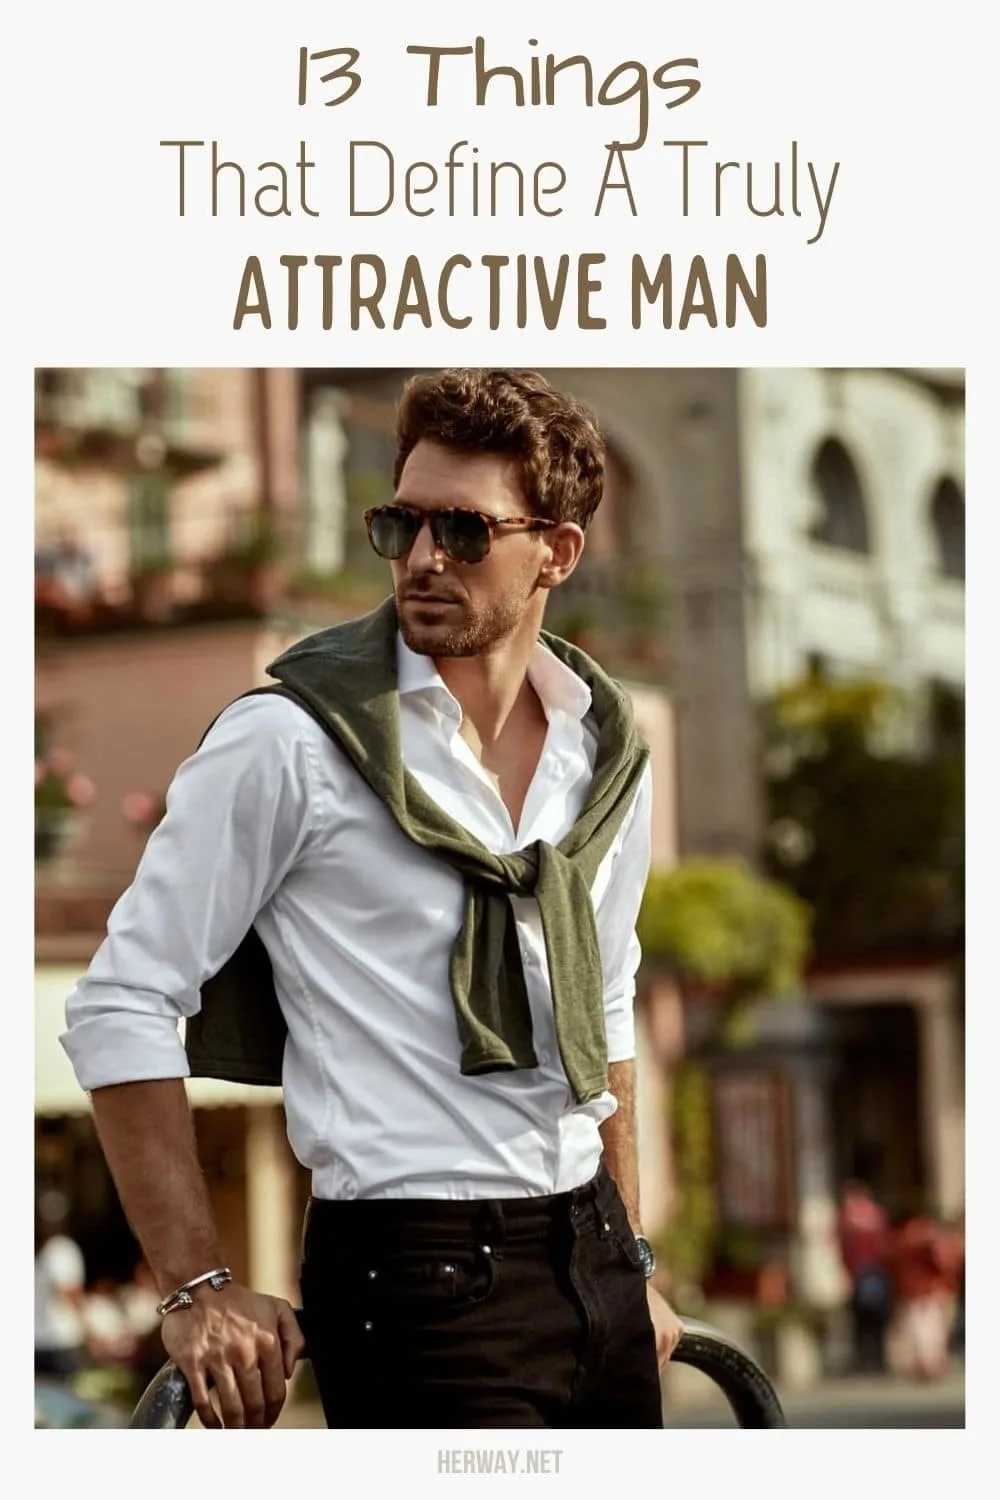 13 Things That Define A Truly Attractive Man